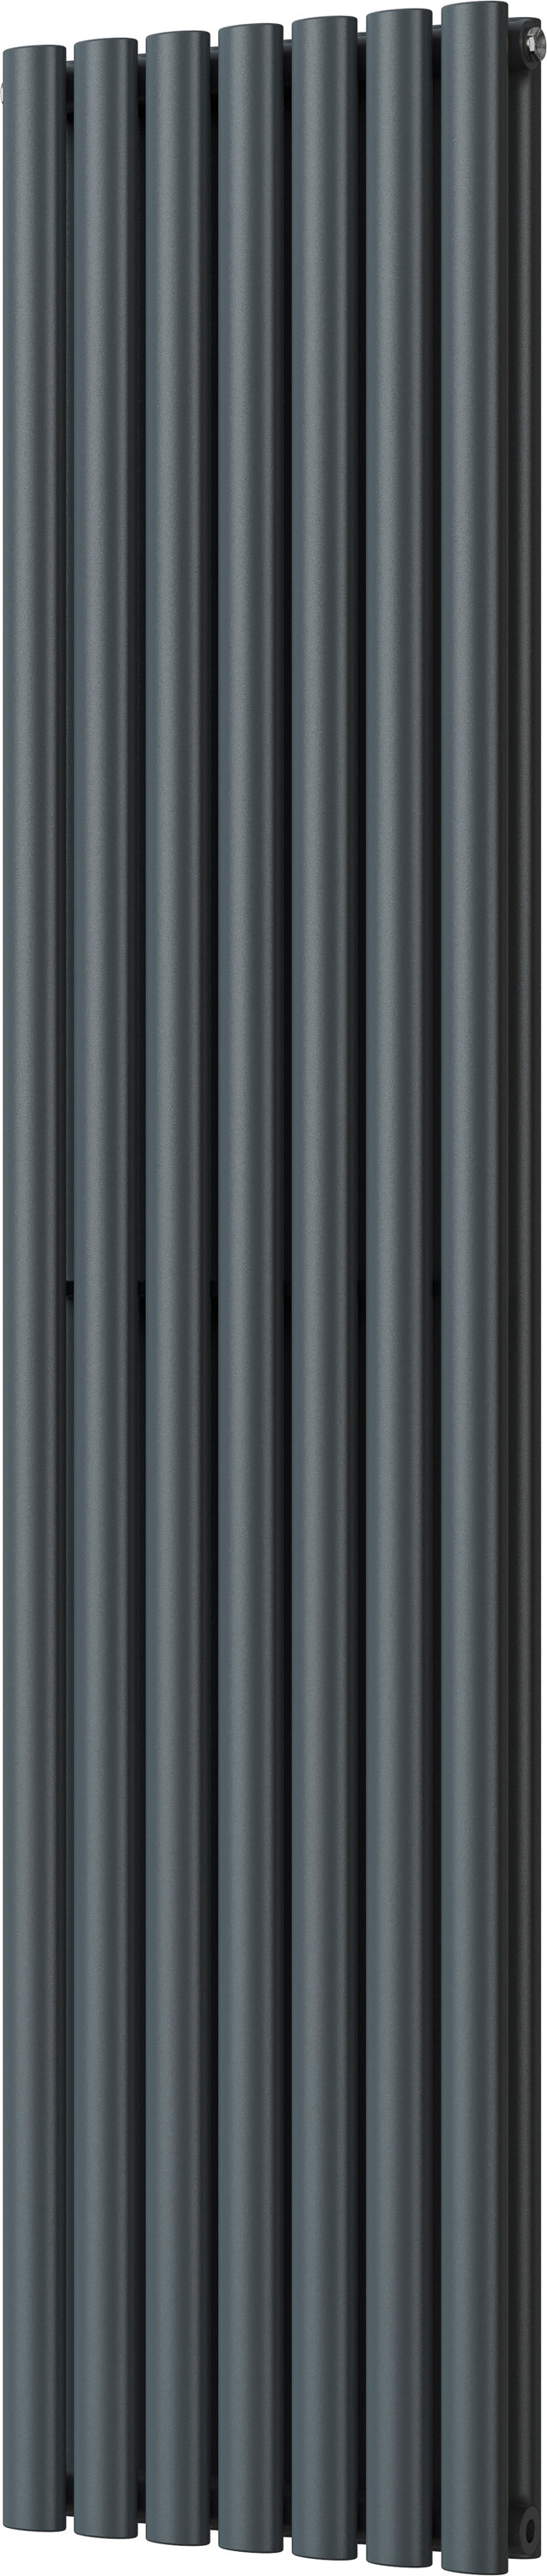 Omeara - Anthracite Vertical Radiator H1800mm x W406mm Double Panel